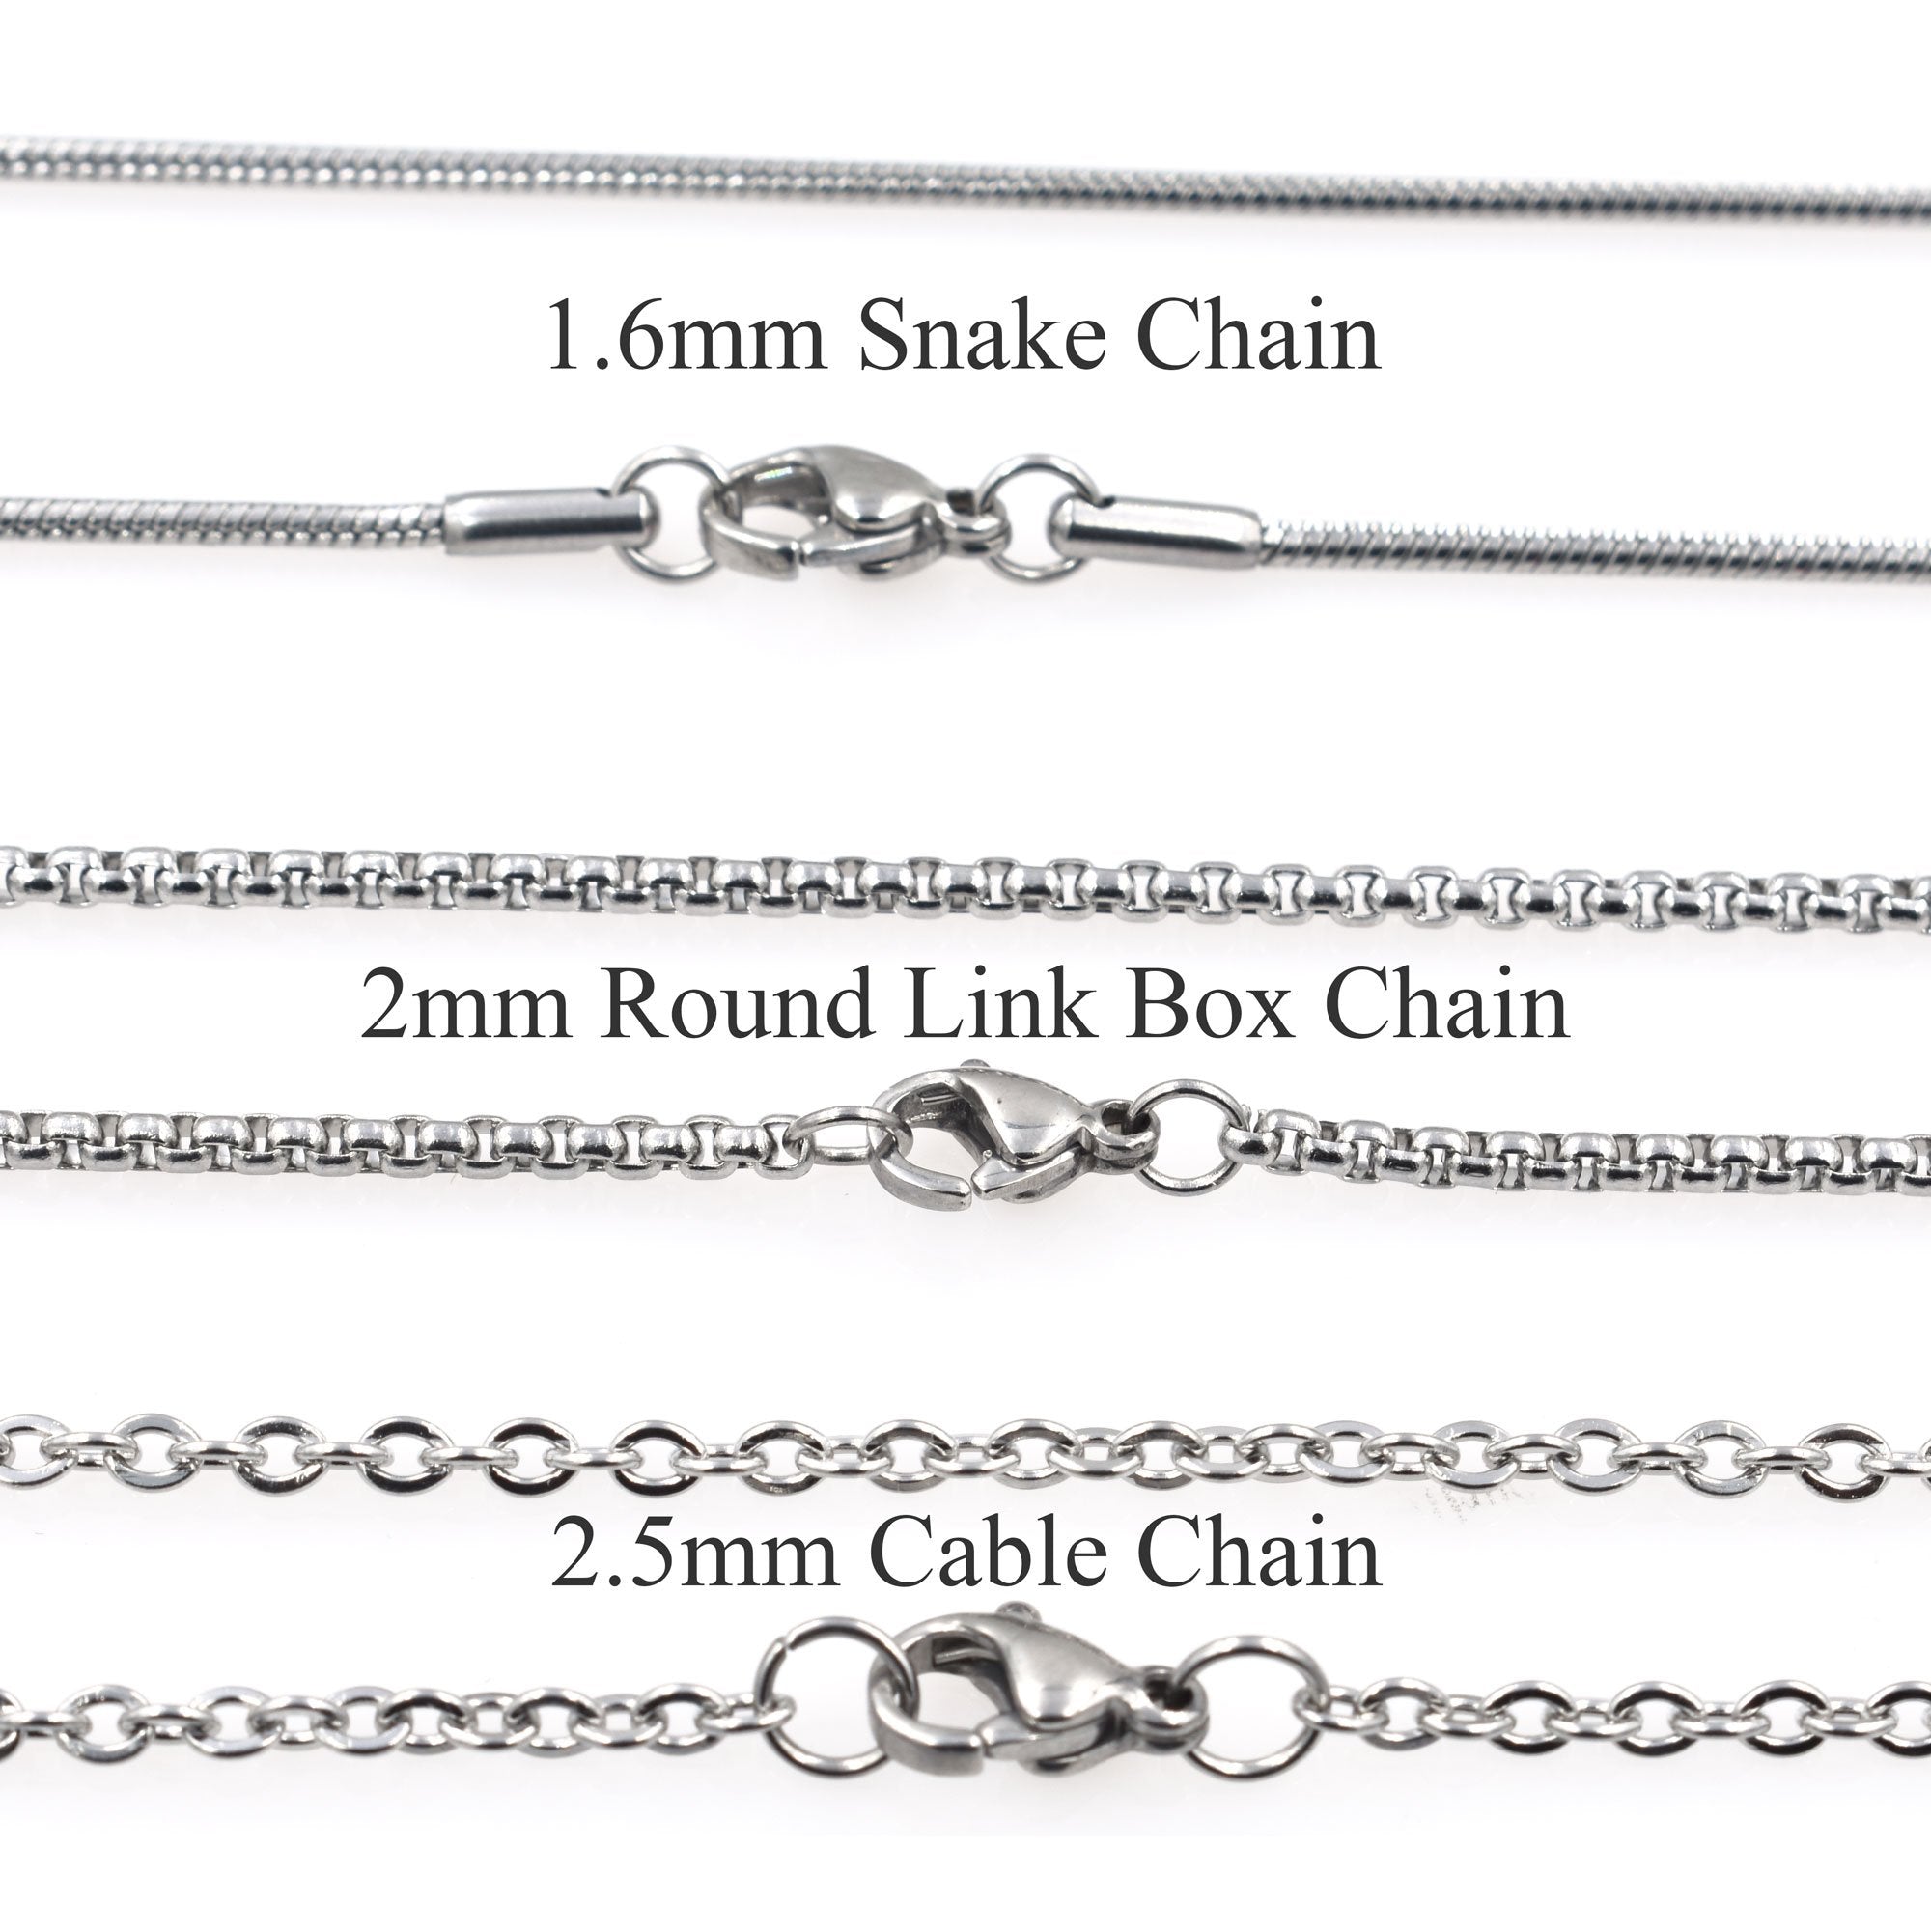 Snake Chain, Box Chain and Cable Chain Options on white background - Sarah & Essie